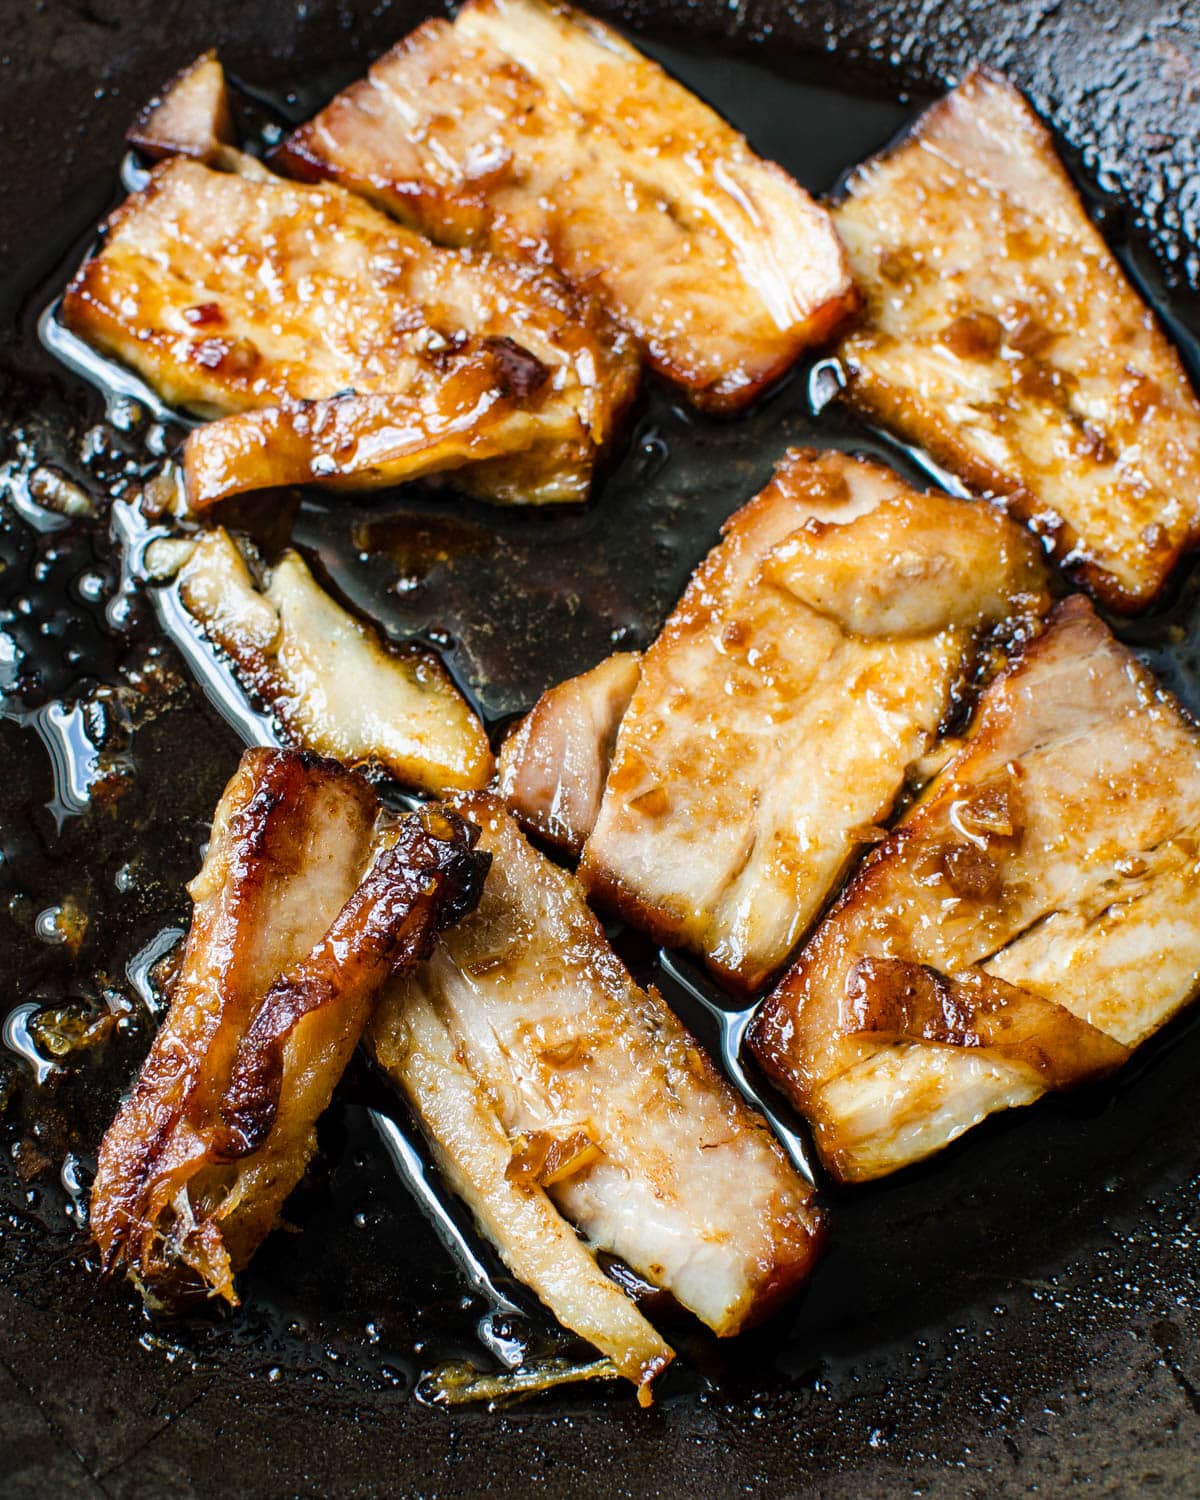 Pan frying the pork belly to release the excess fat.